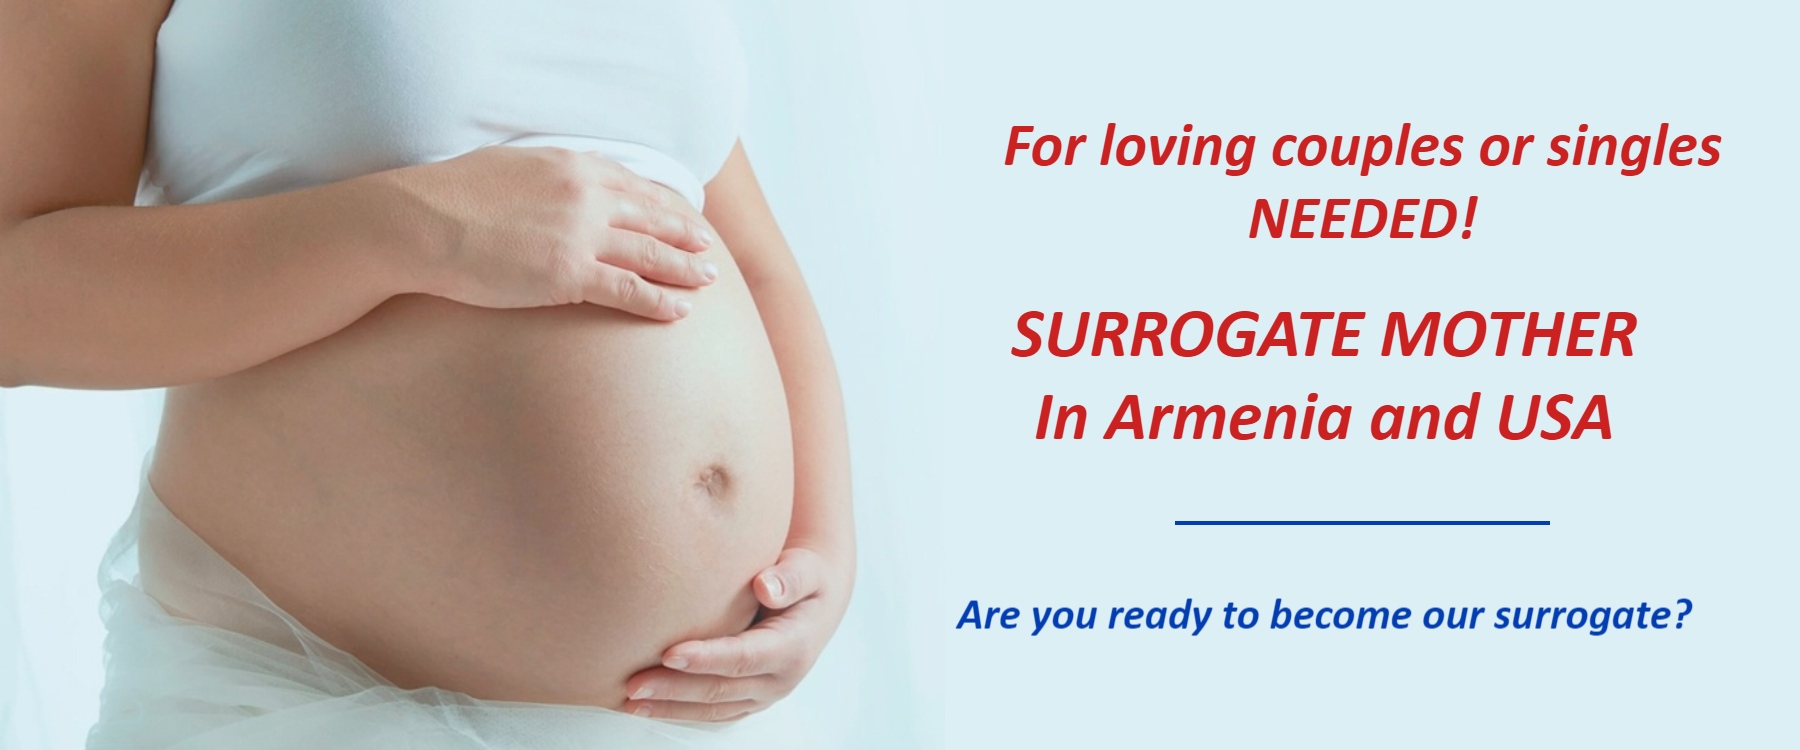 Become a surrogate mother? For additional information please contact our agency